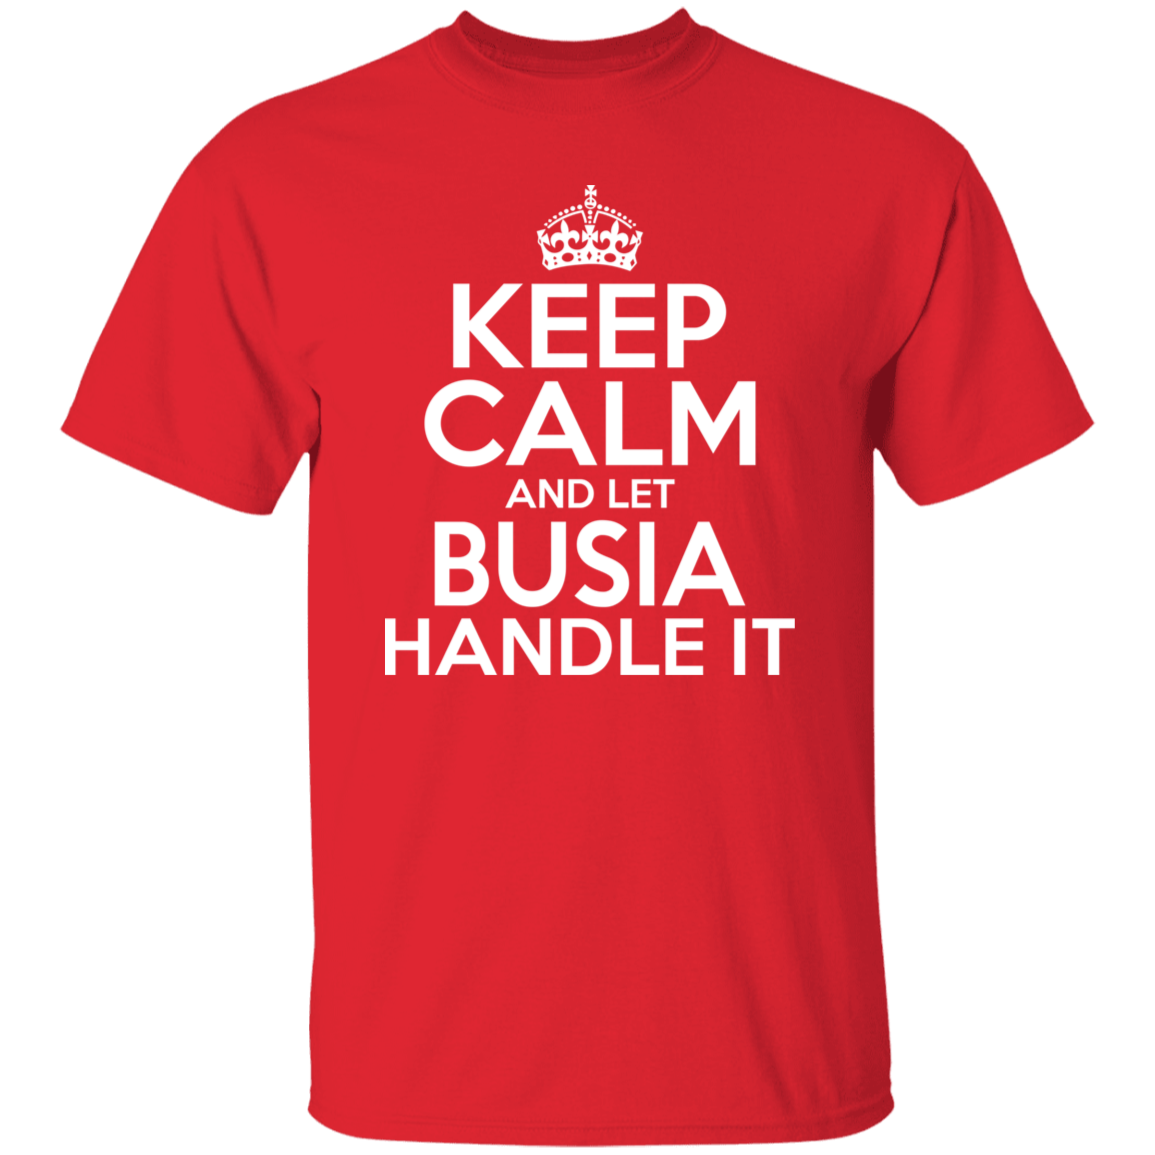 Keep Calm And Let Busia Handle It Apparel CustomCat G500 5.3 oz. T-Shirt Red S